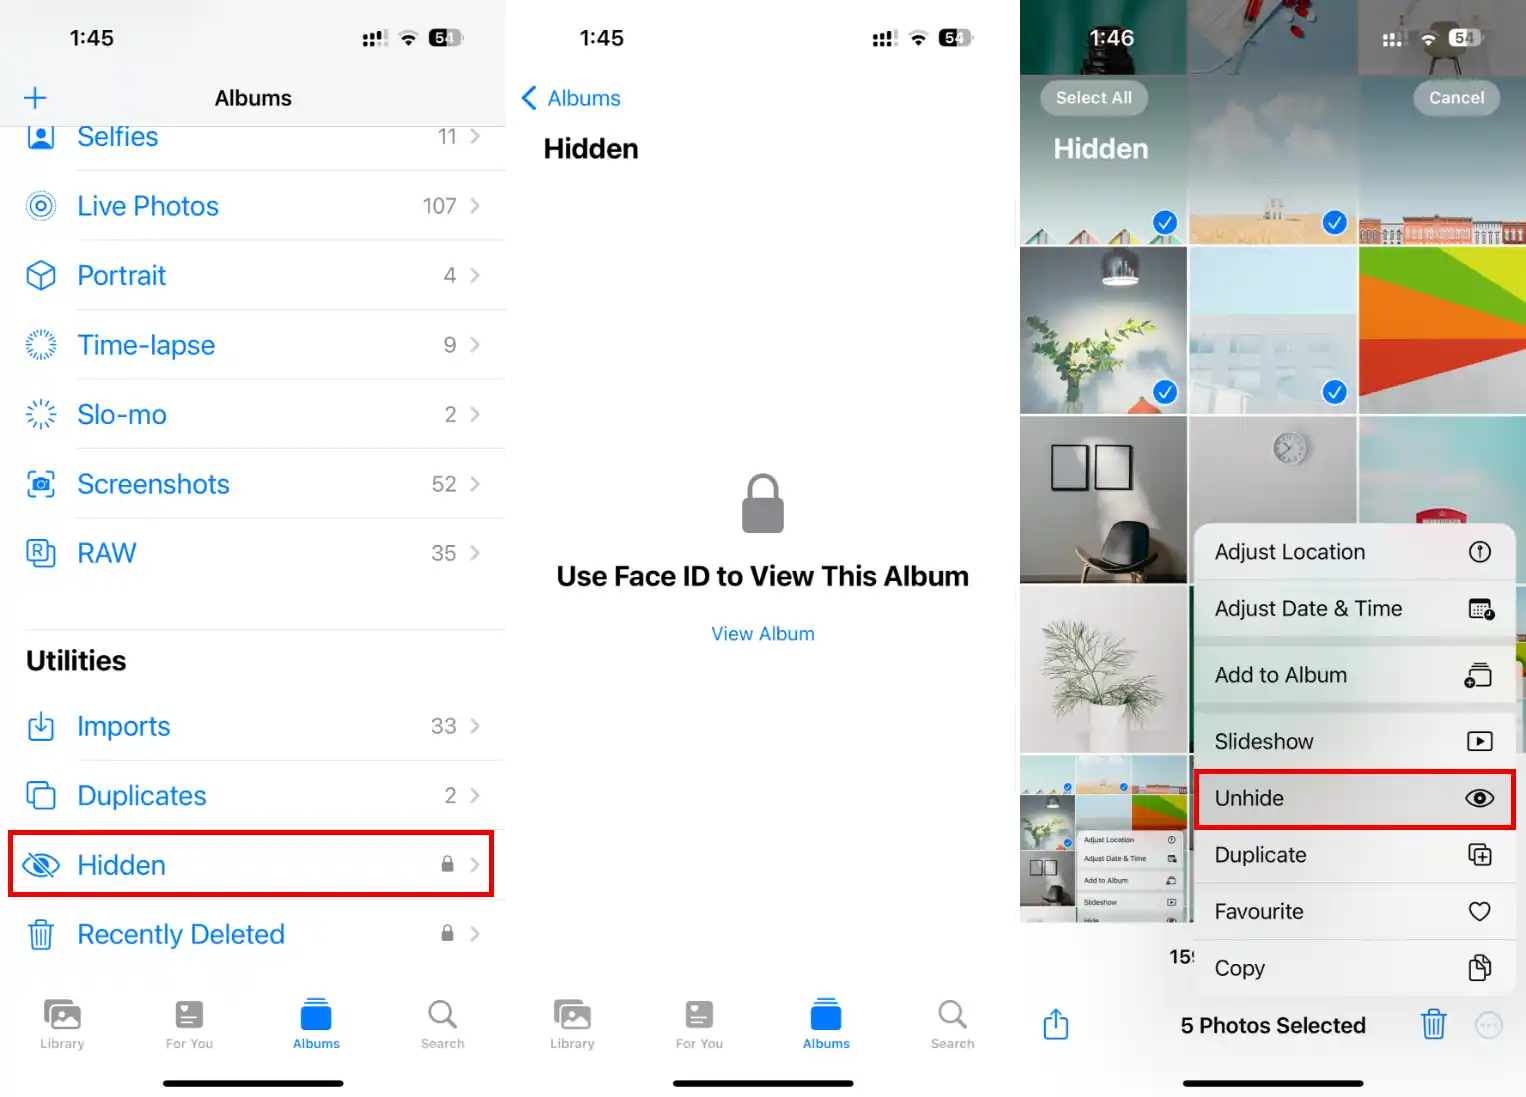 how to hide photos on iphone